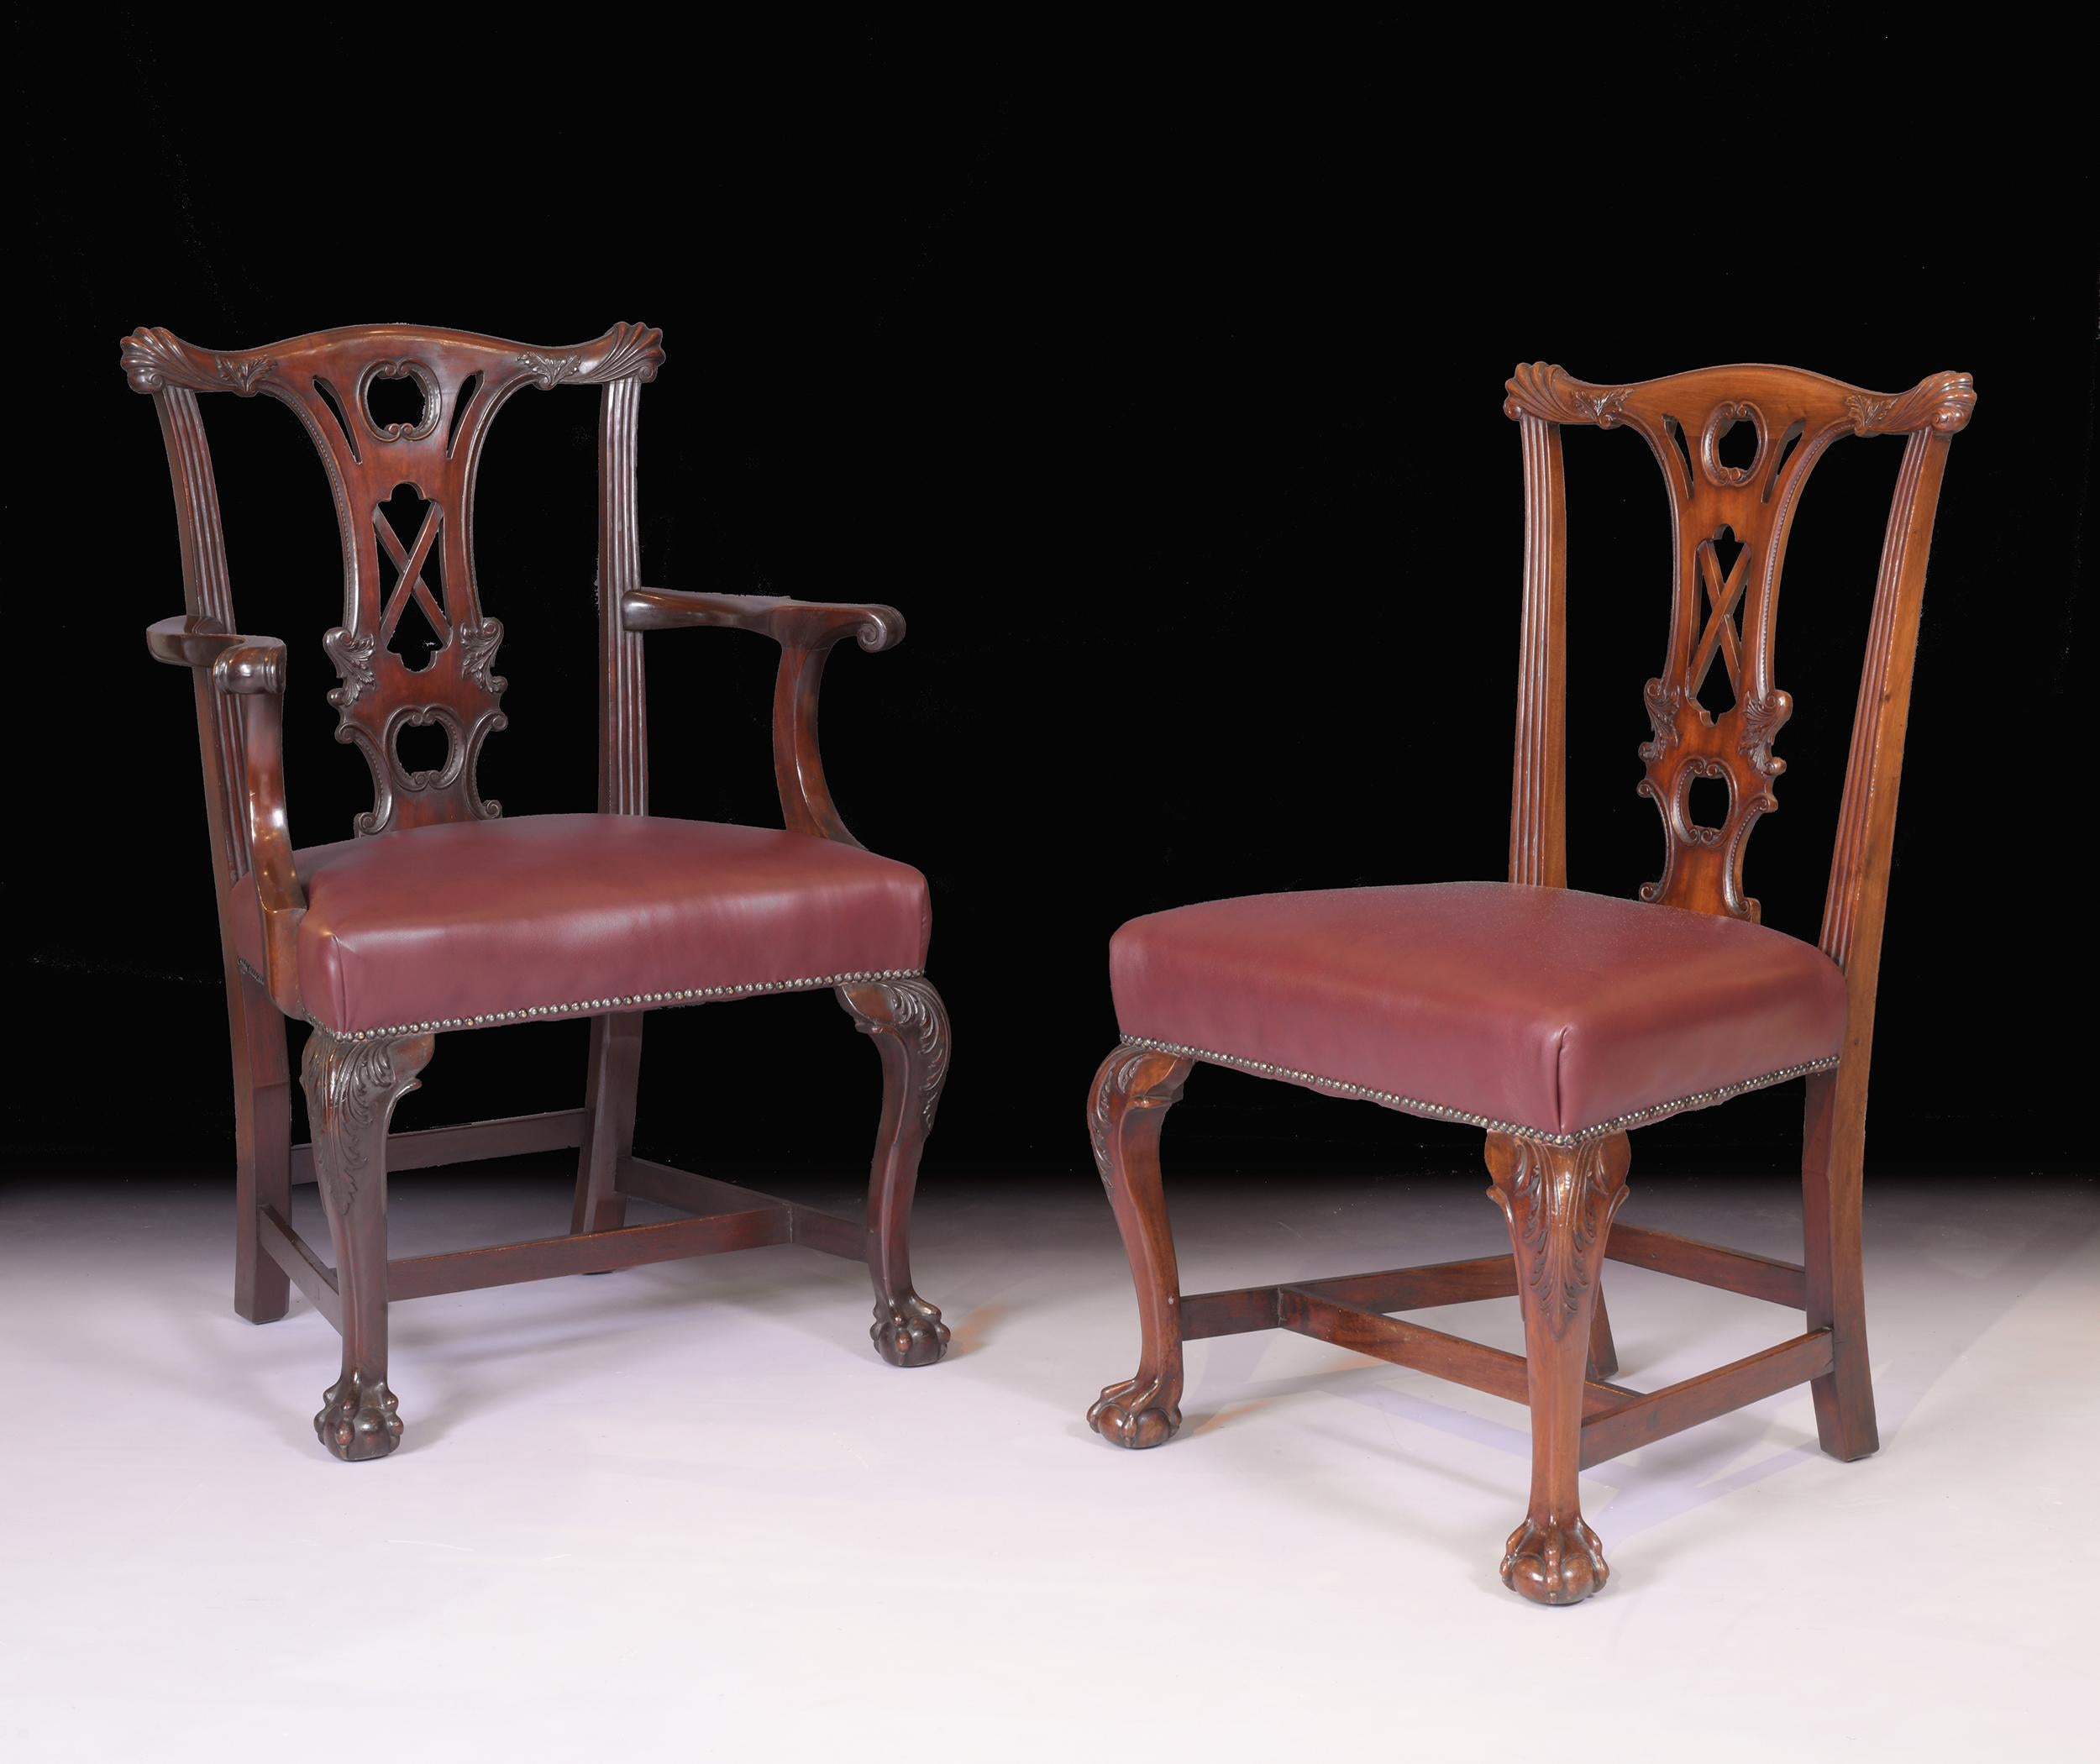 A stunning set of 10 mahogany Chippendale style dining chairs by James Hicks of Dublin. The pierced acanthus carved back splats with “shell” corners upholstered in English burgundy leather, on carved cabriolet legs with cross-stretchers ending on